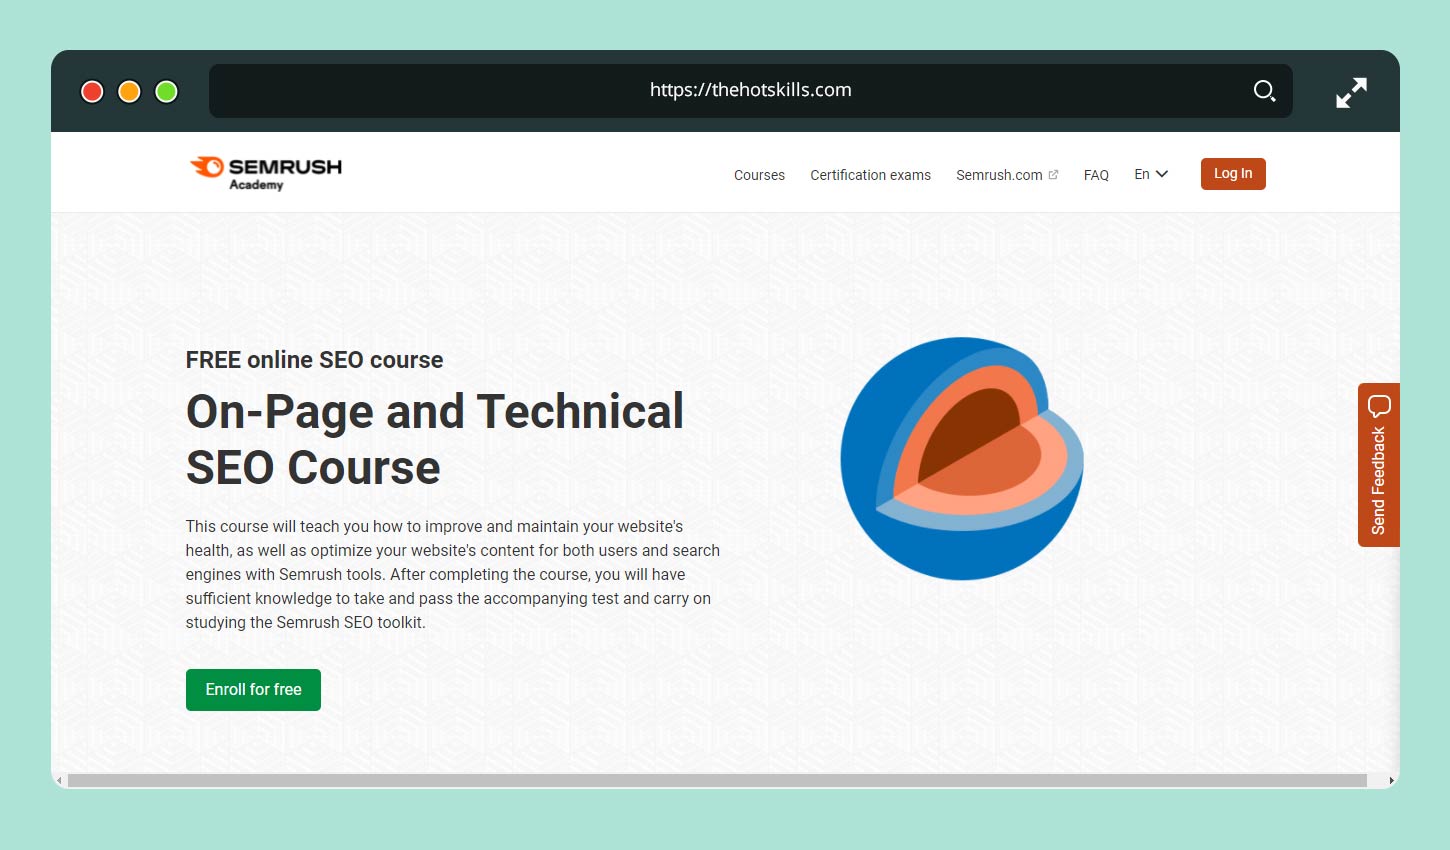 On-Page and Technical SEO Course